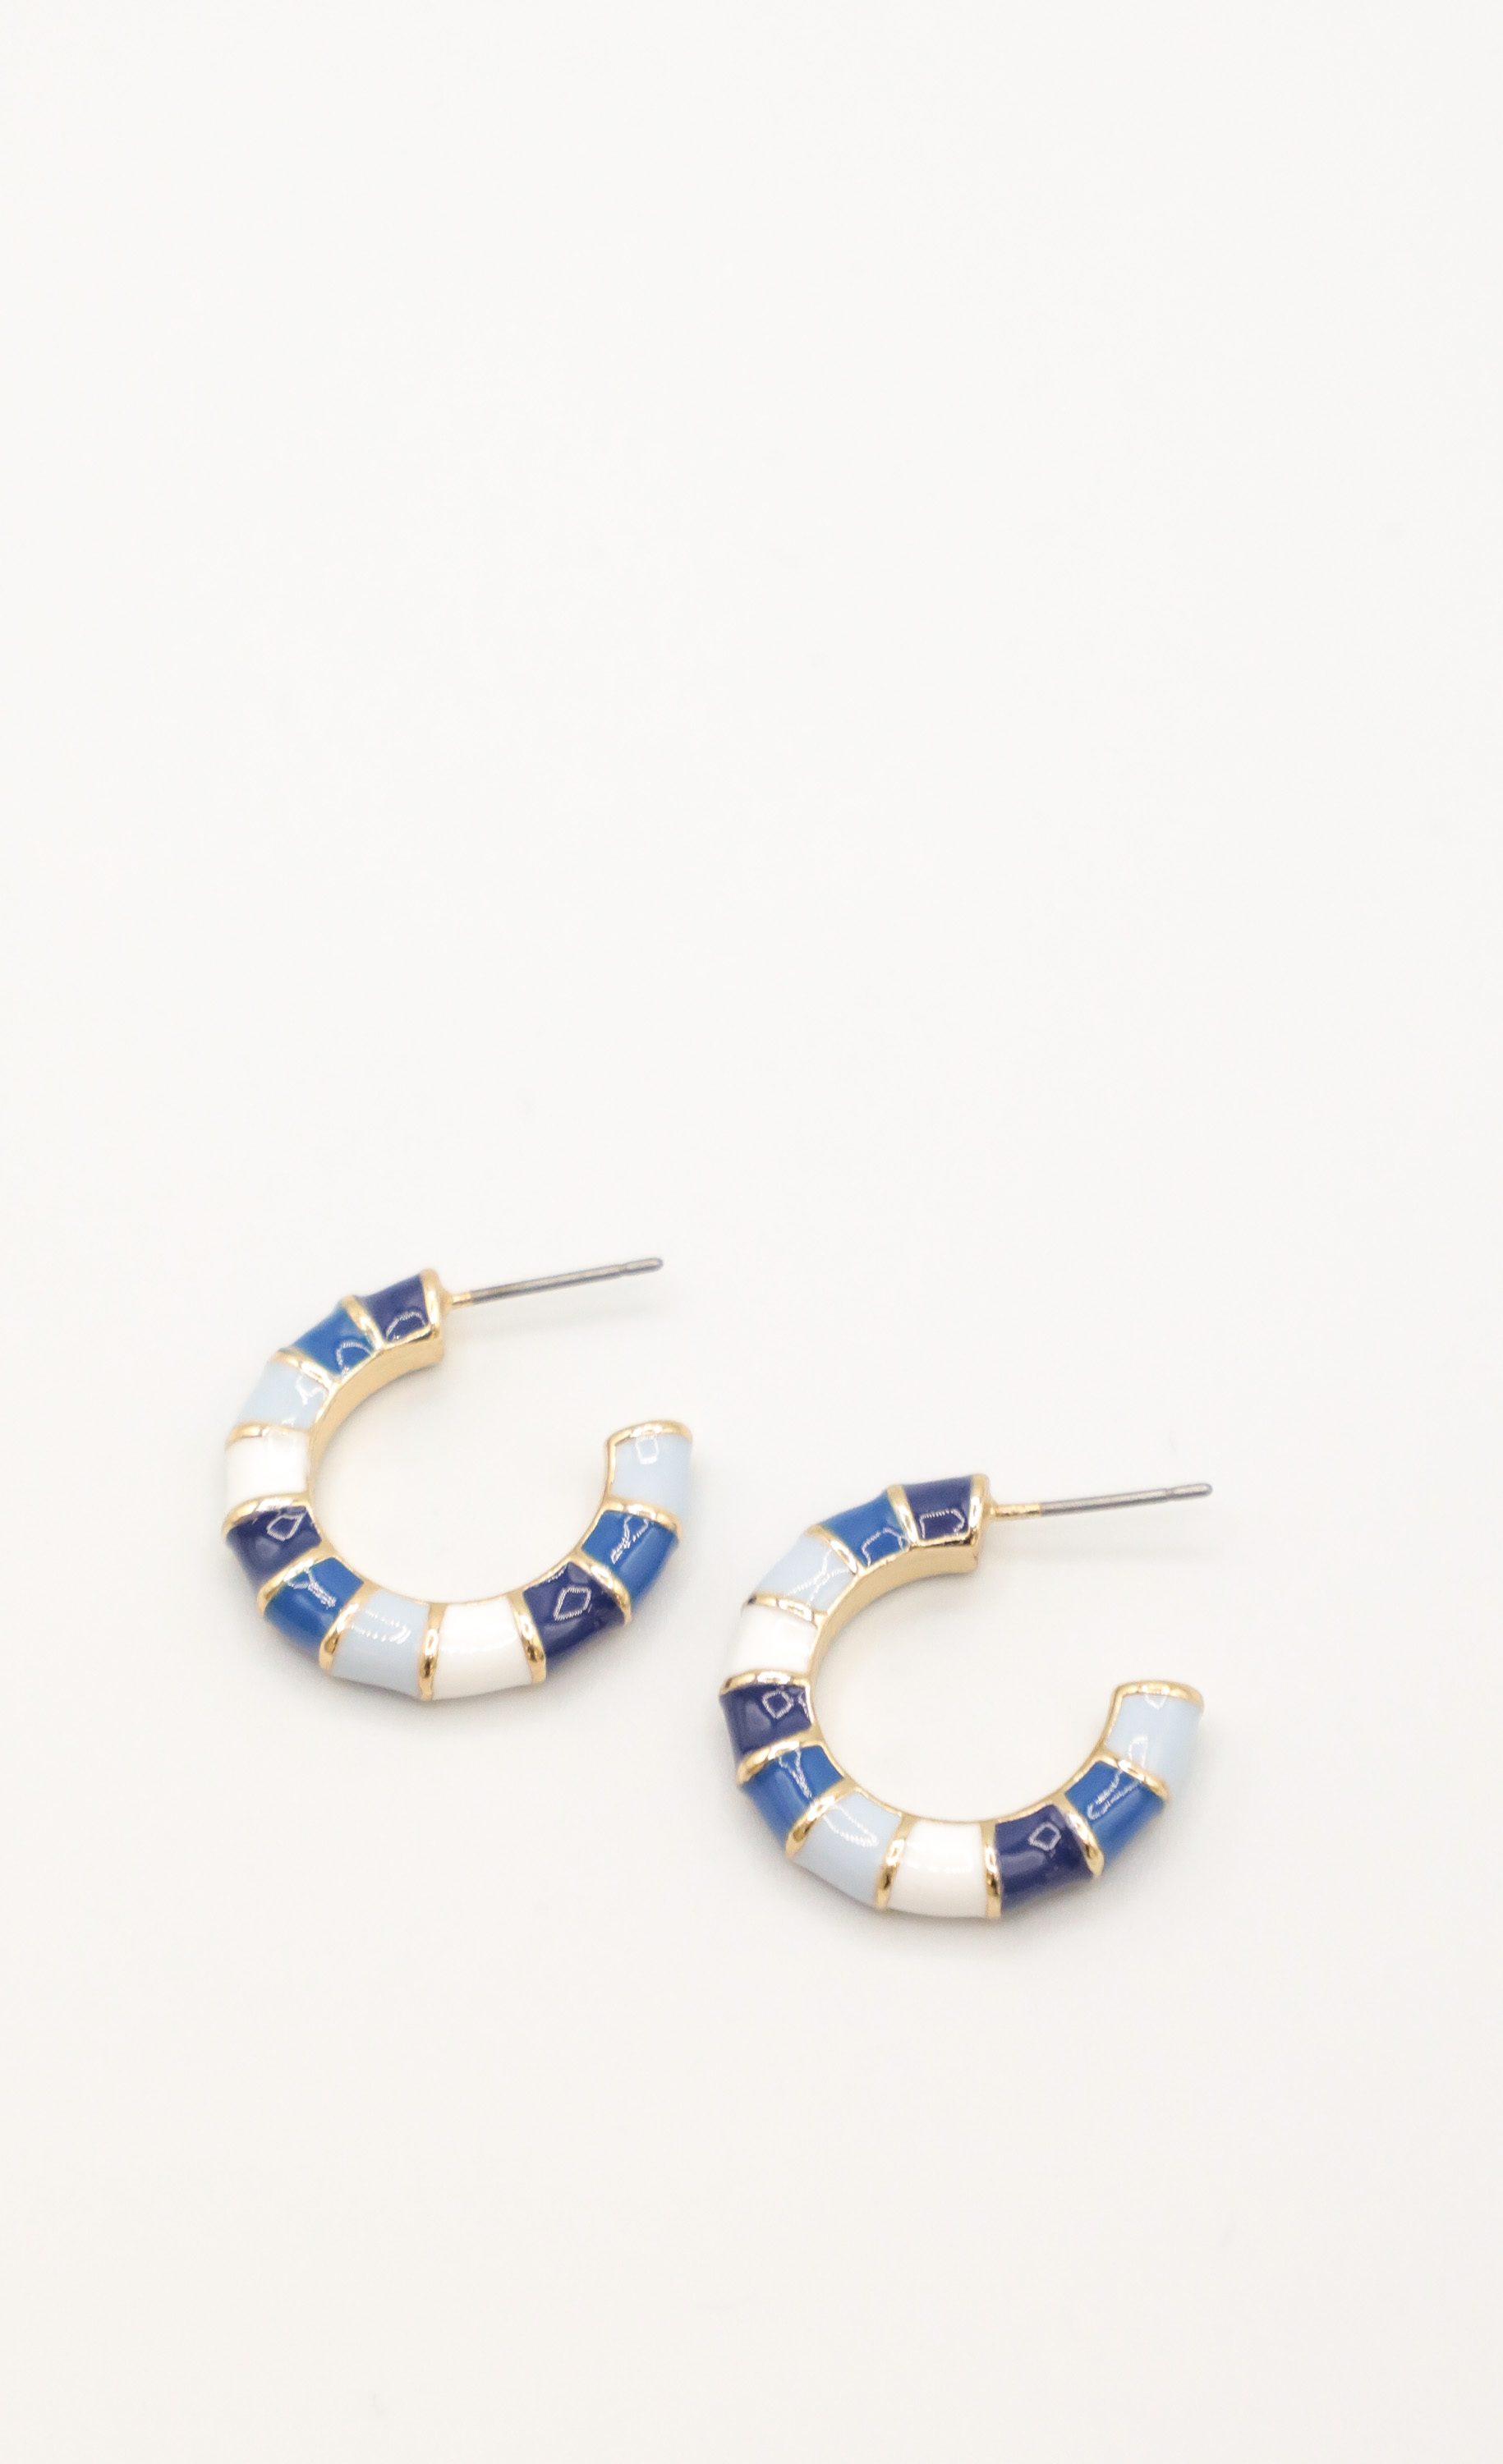 Around The World Earring Set in Blue